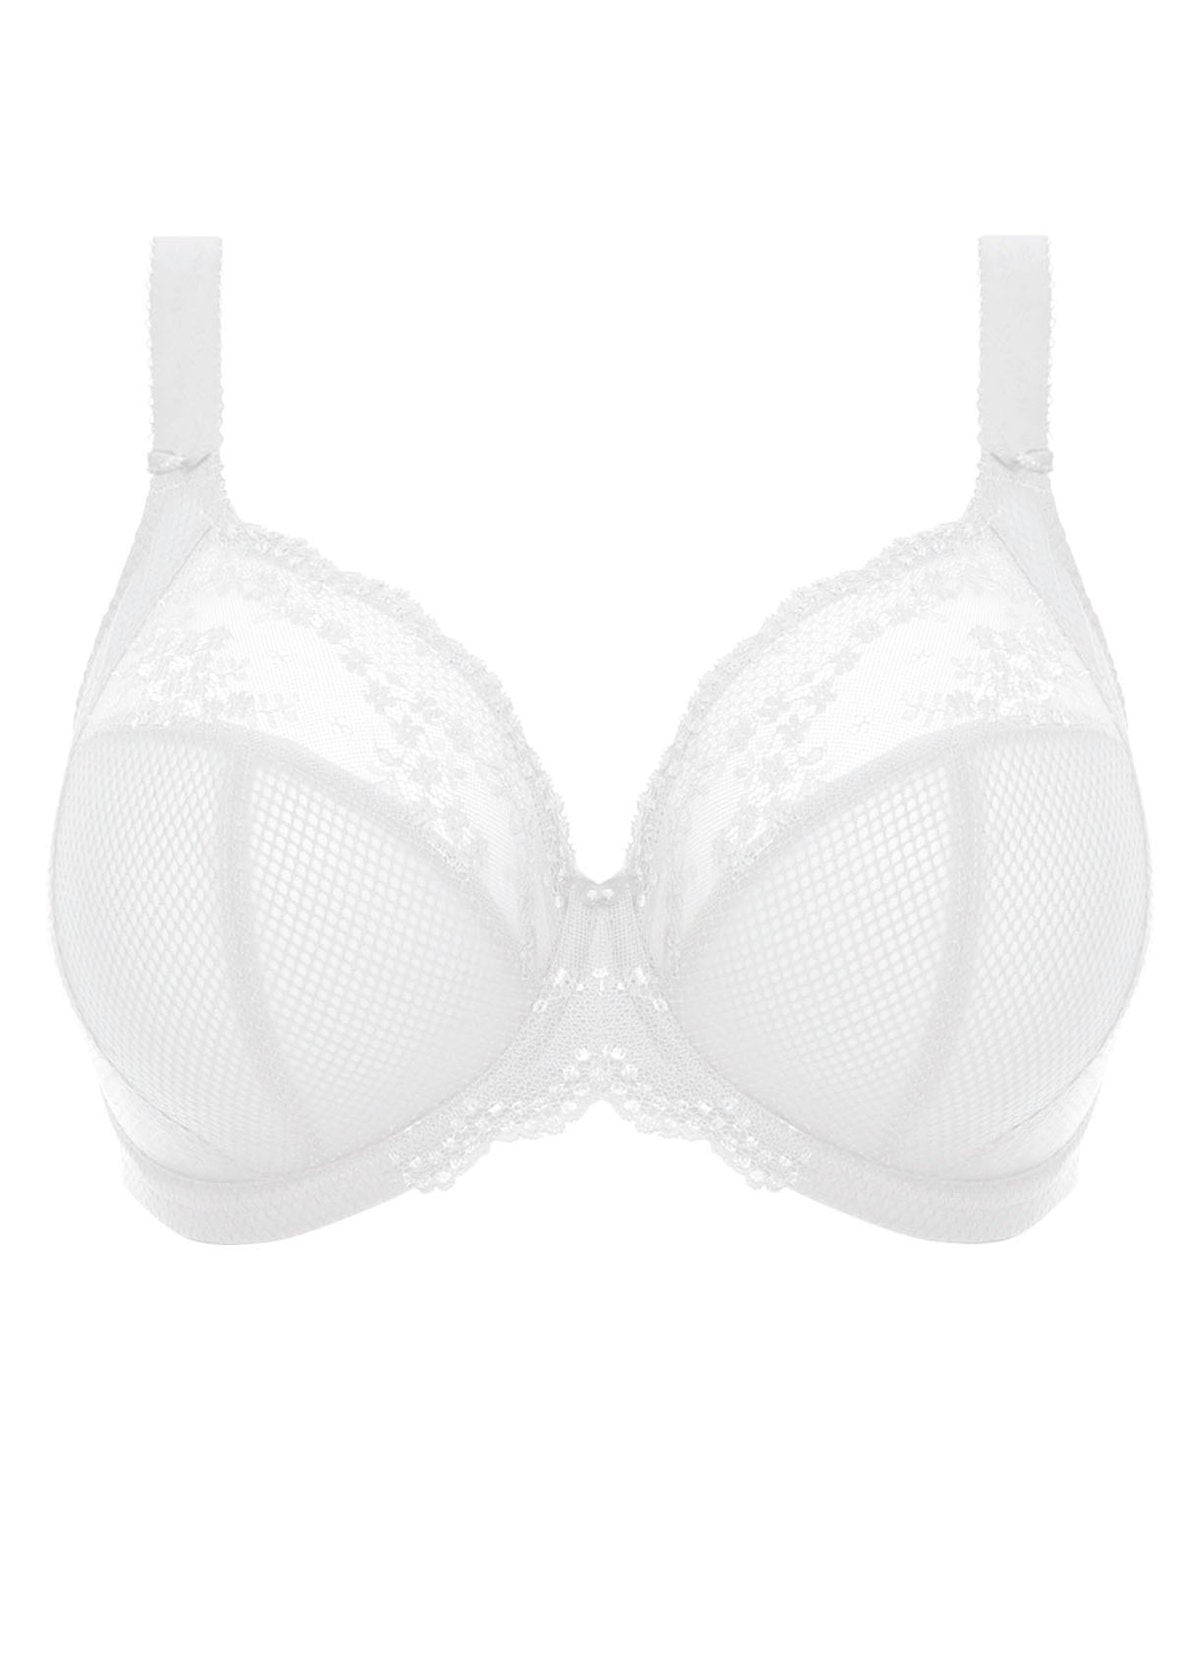 Coquette Stretch Lace Bralette White One Size Fits Most 